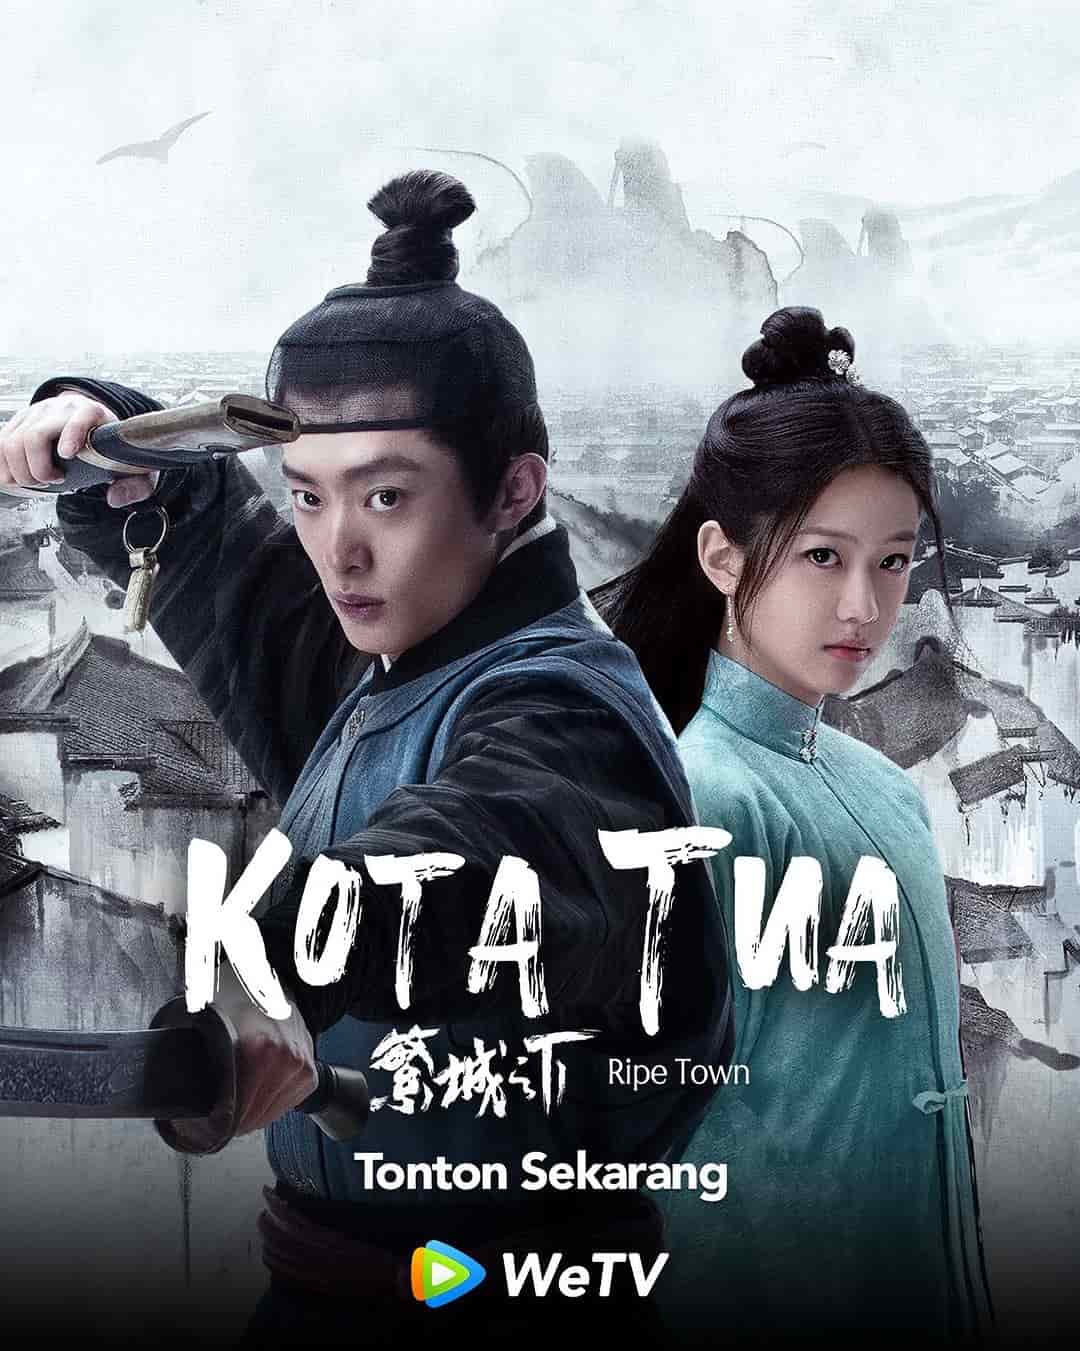  Ripe Town - Sinopsis, Pemain, OST, Episode, Review